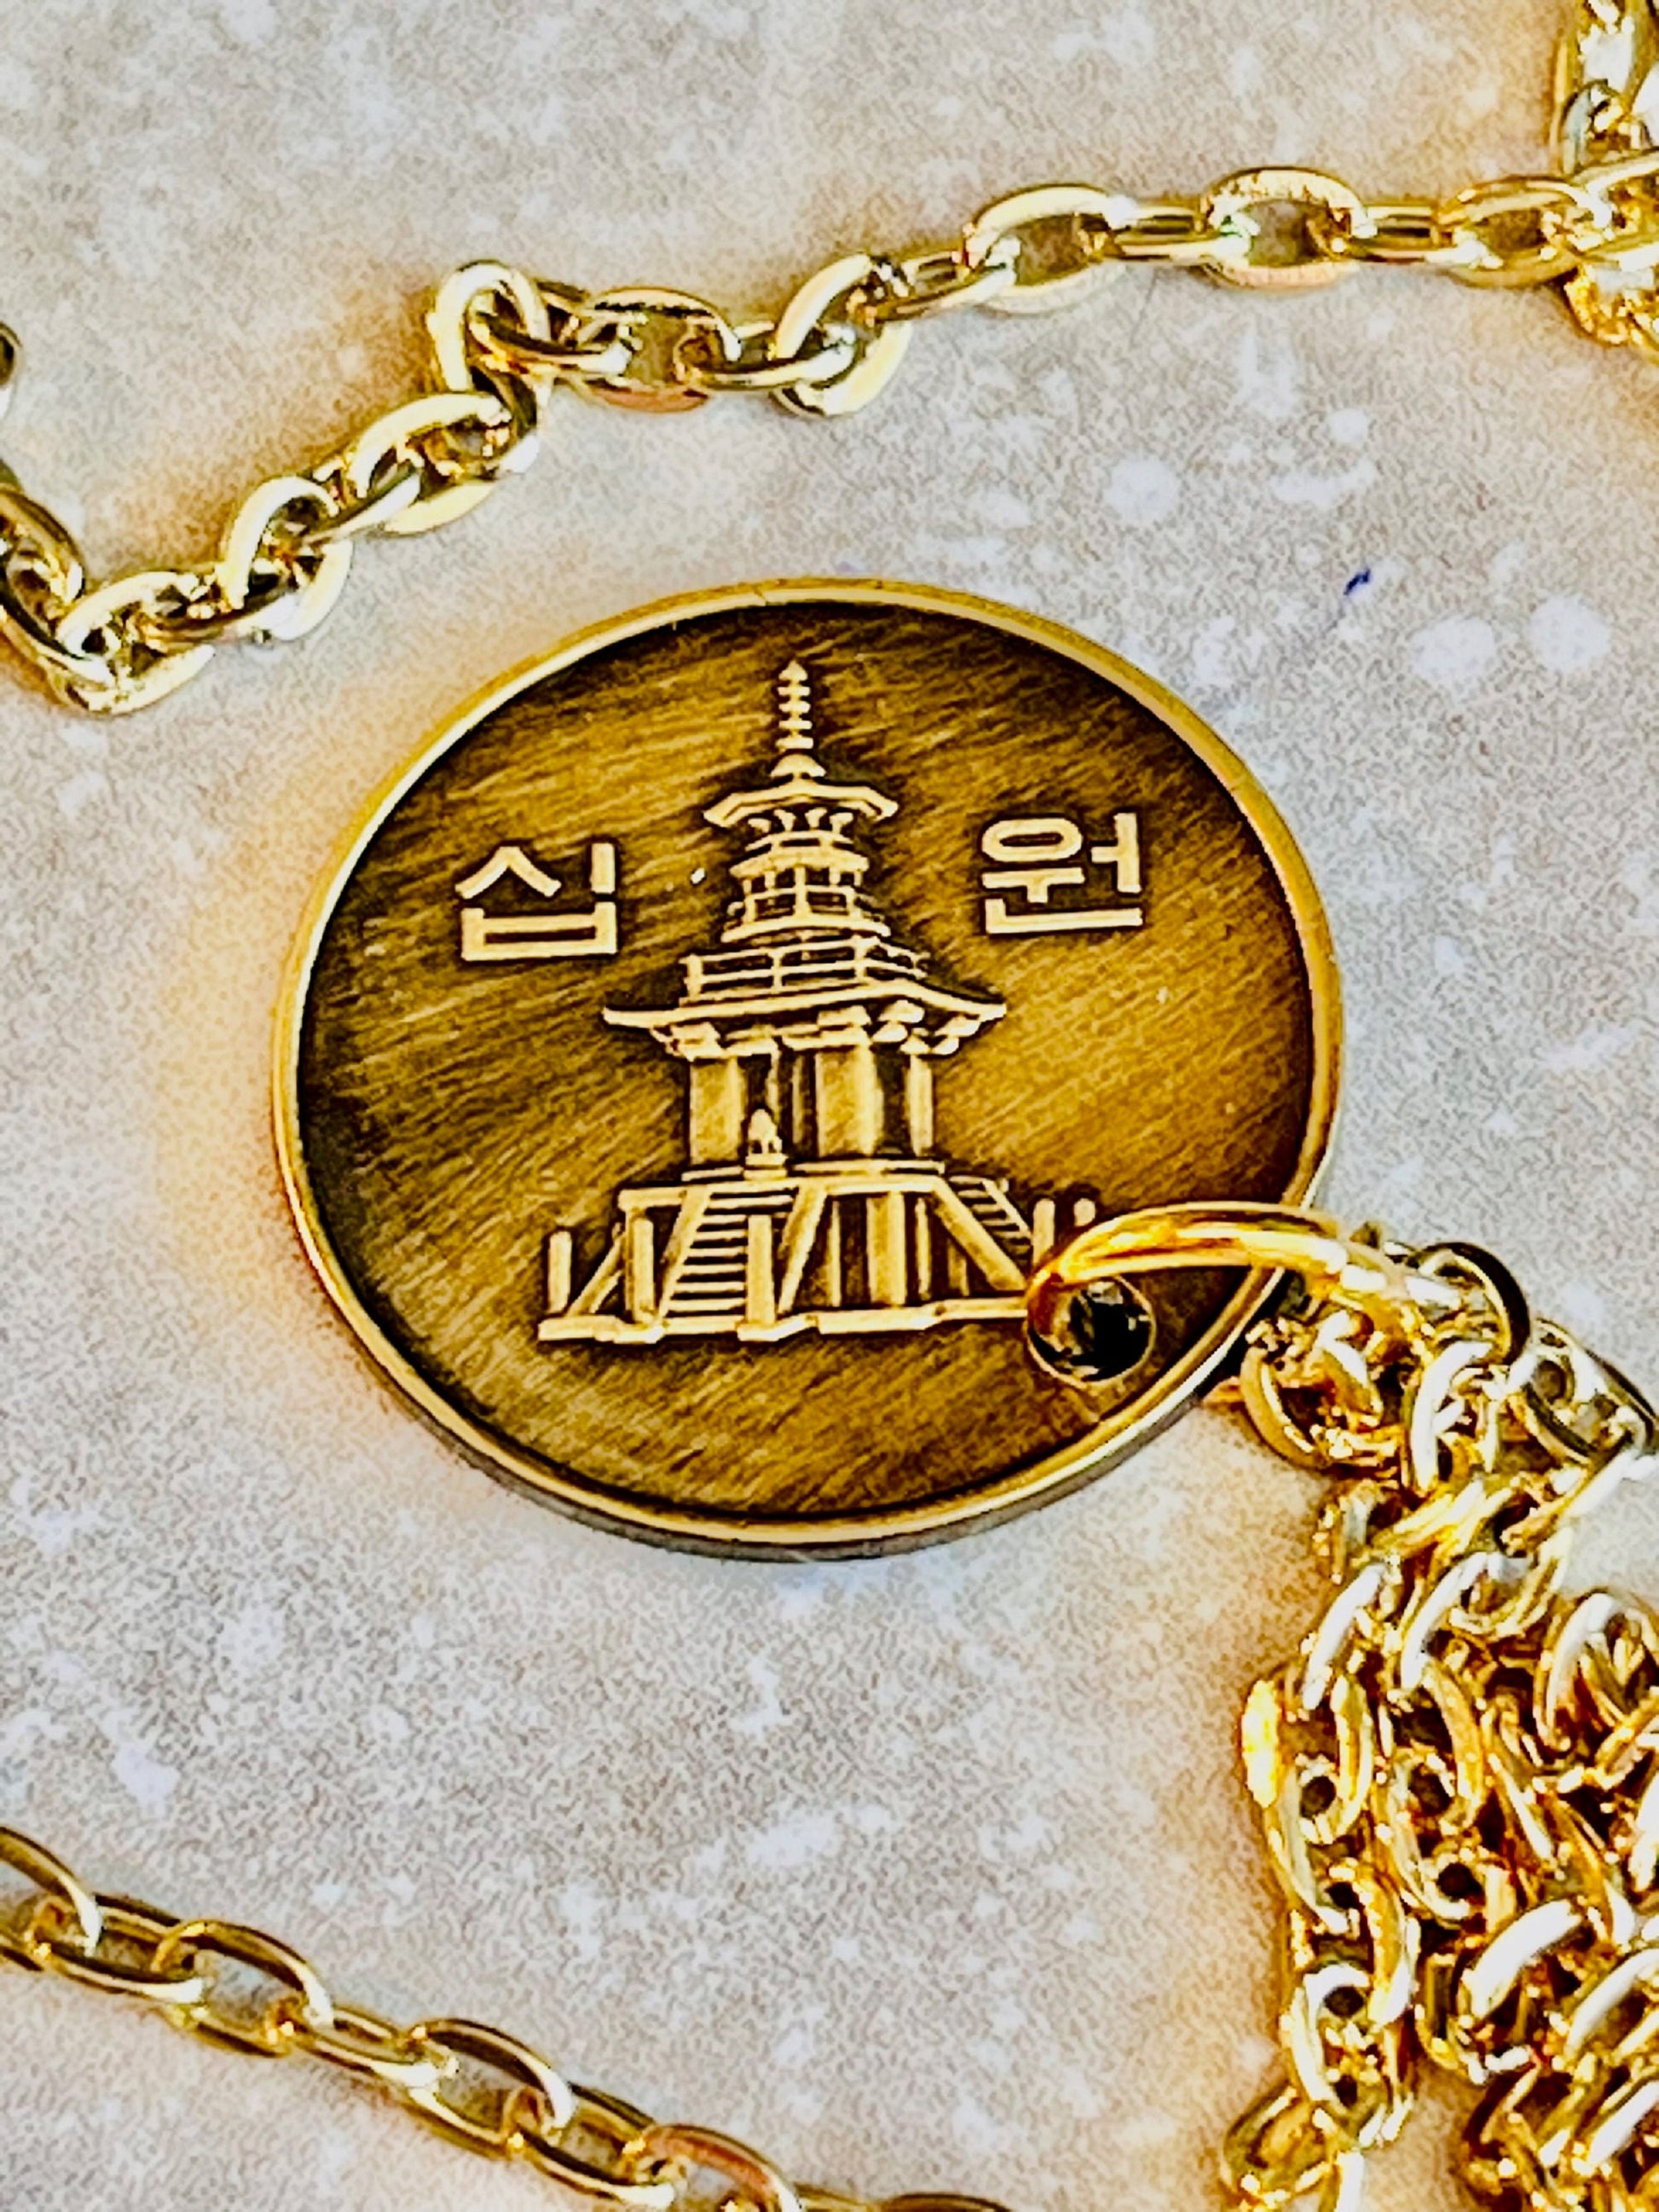 South Korea Coin Necklace Korean 10 Won Personal Pendant Old Vintage Handmade Jewelry Gift Friend Charm For Him Her World Coin Collector